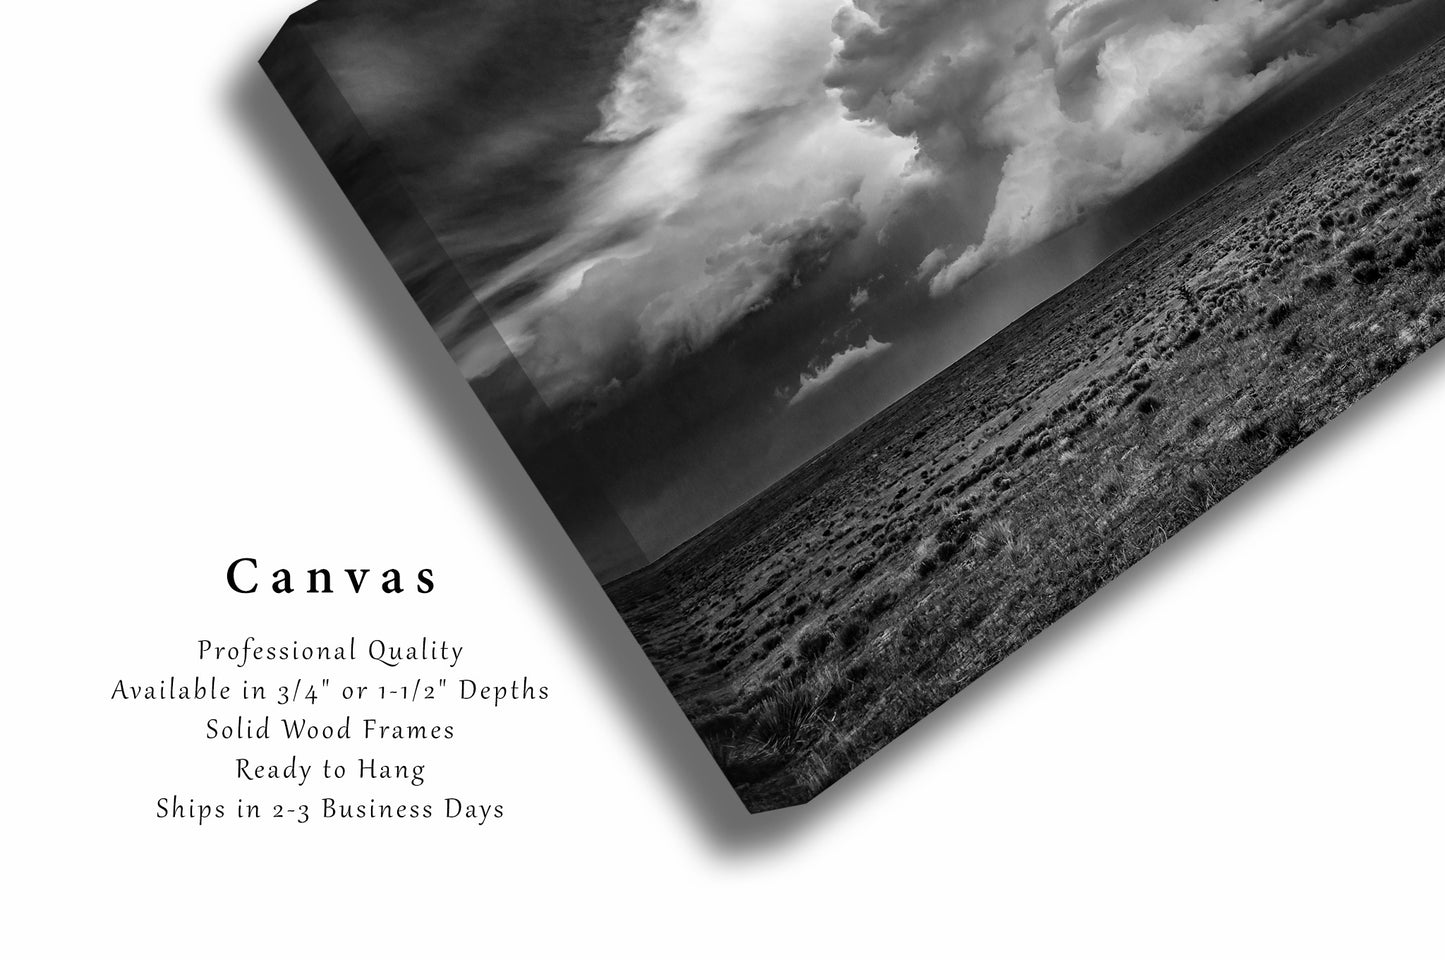 Storm Canvas Wall Art - Black and White Gallery Wrap of Supercell Thunderstorm Over High Plains in Oklahoma - Landscape Photography Artwork